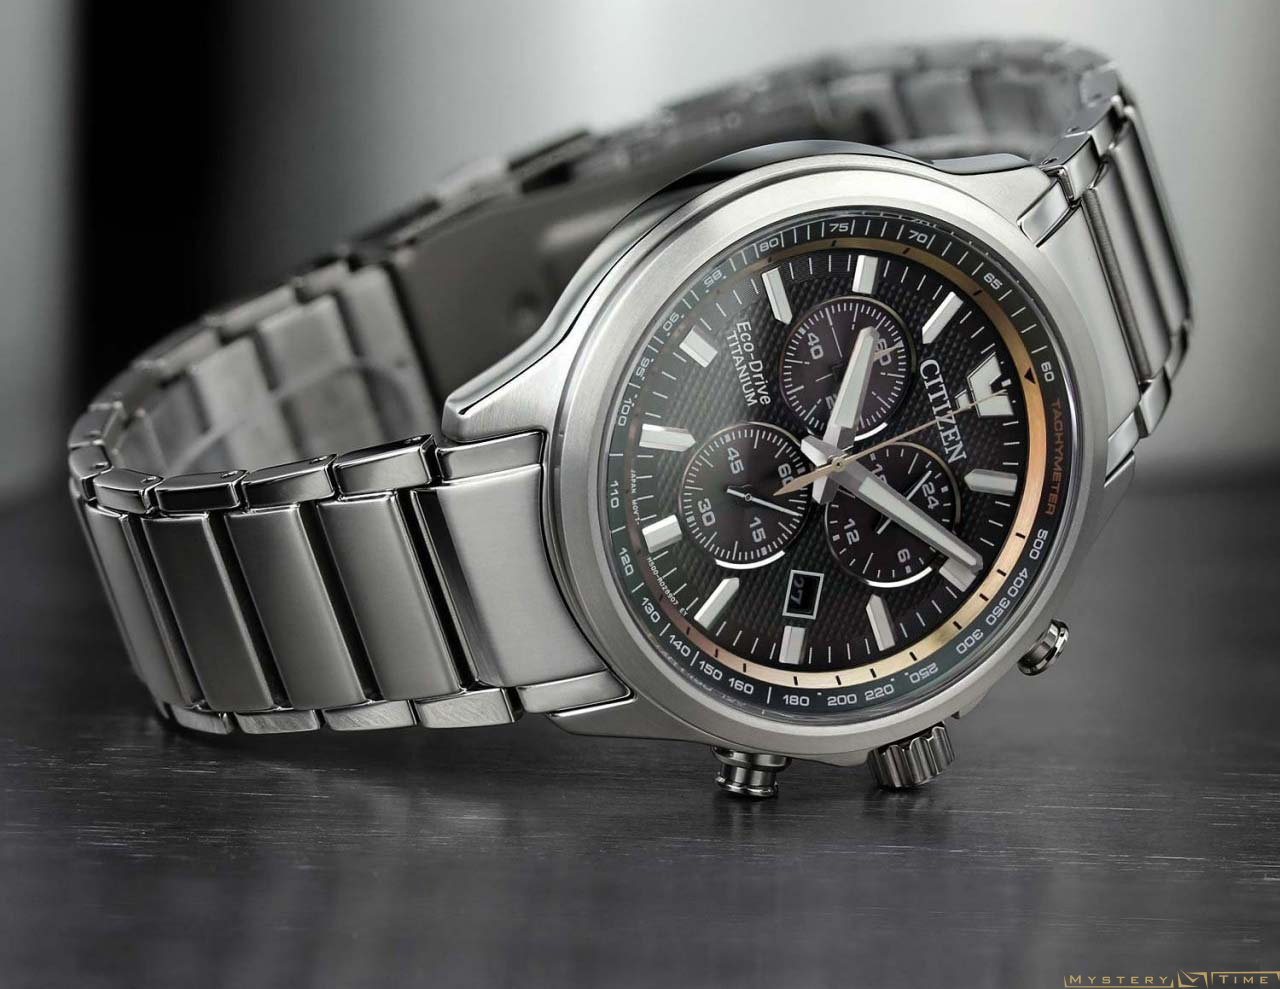 Citizen AT2470-85H